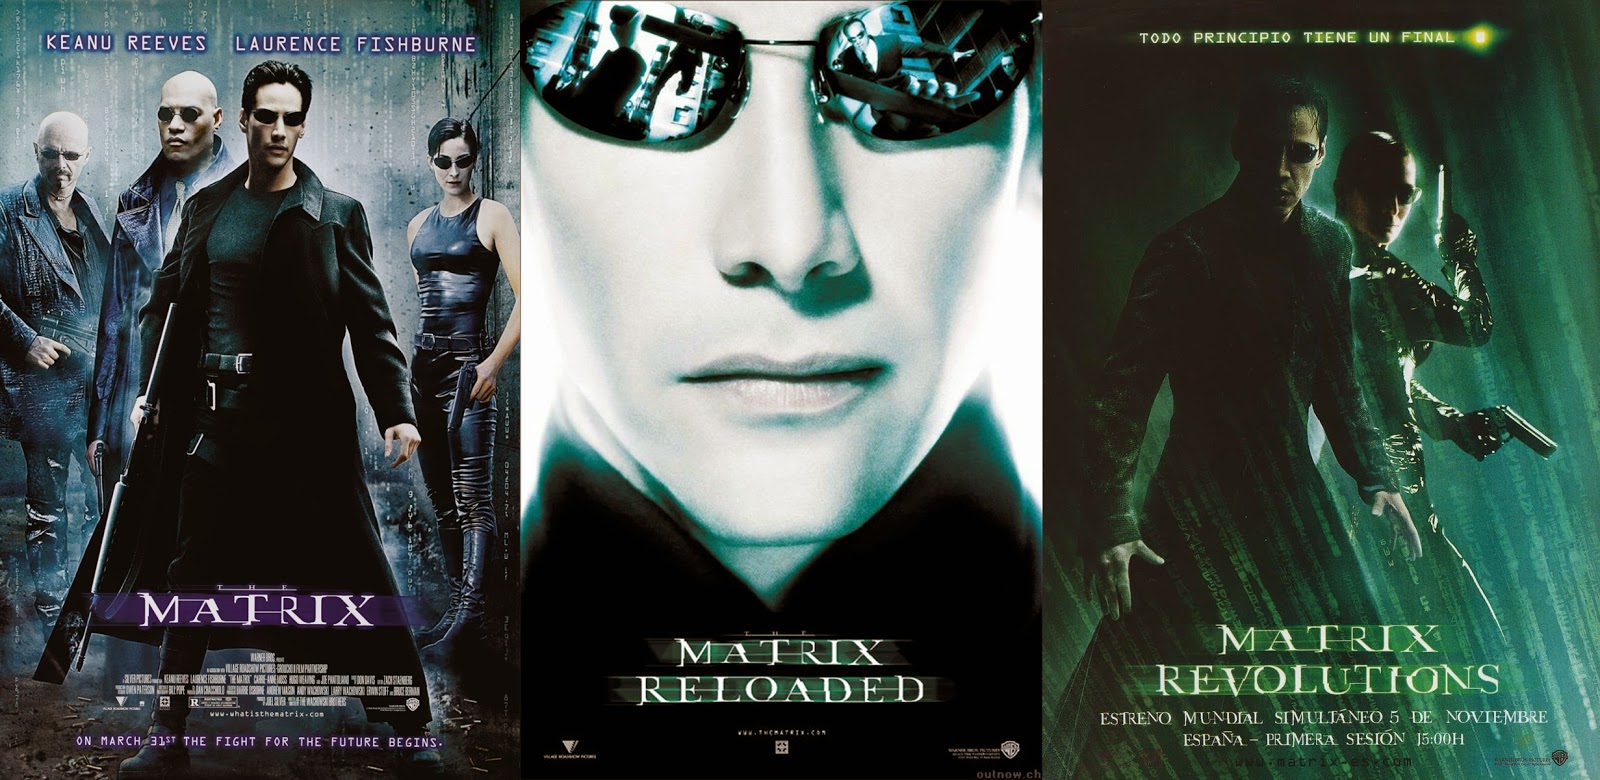 The Matrix Reloaded full movie in hindi free  hd 1080p